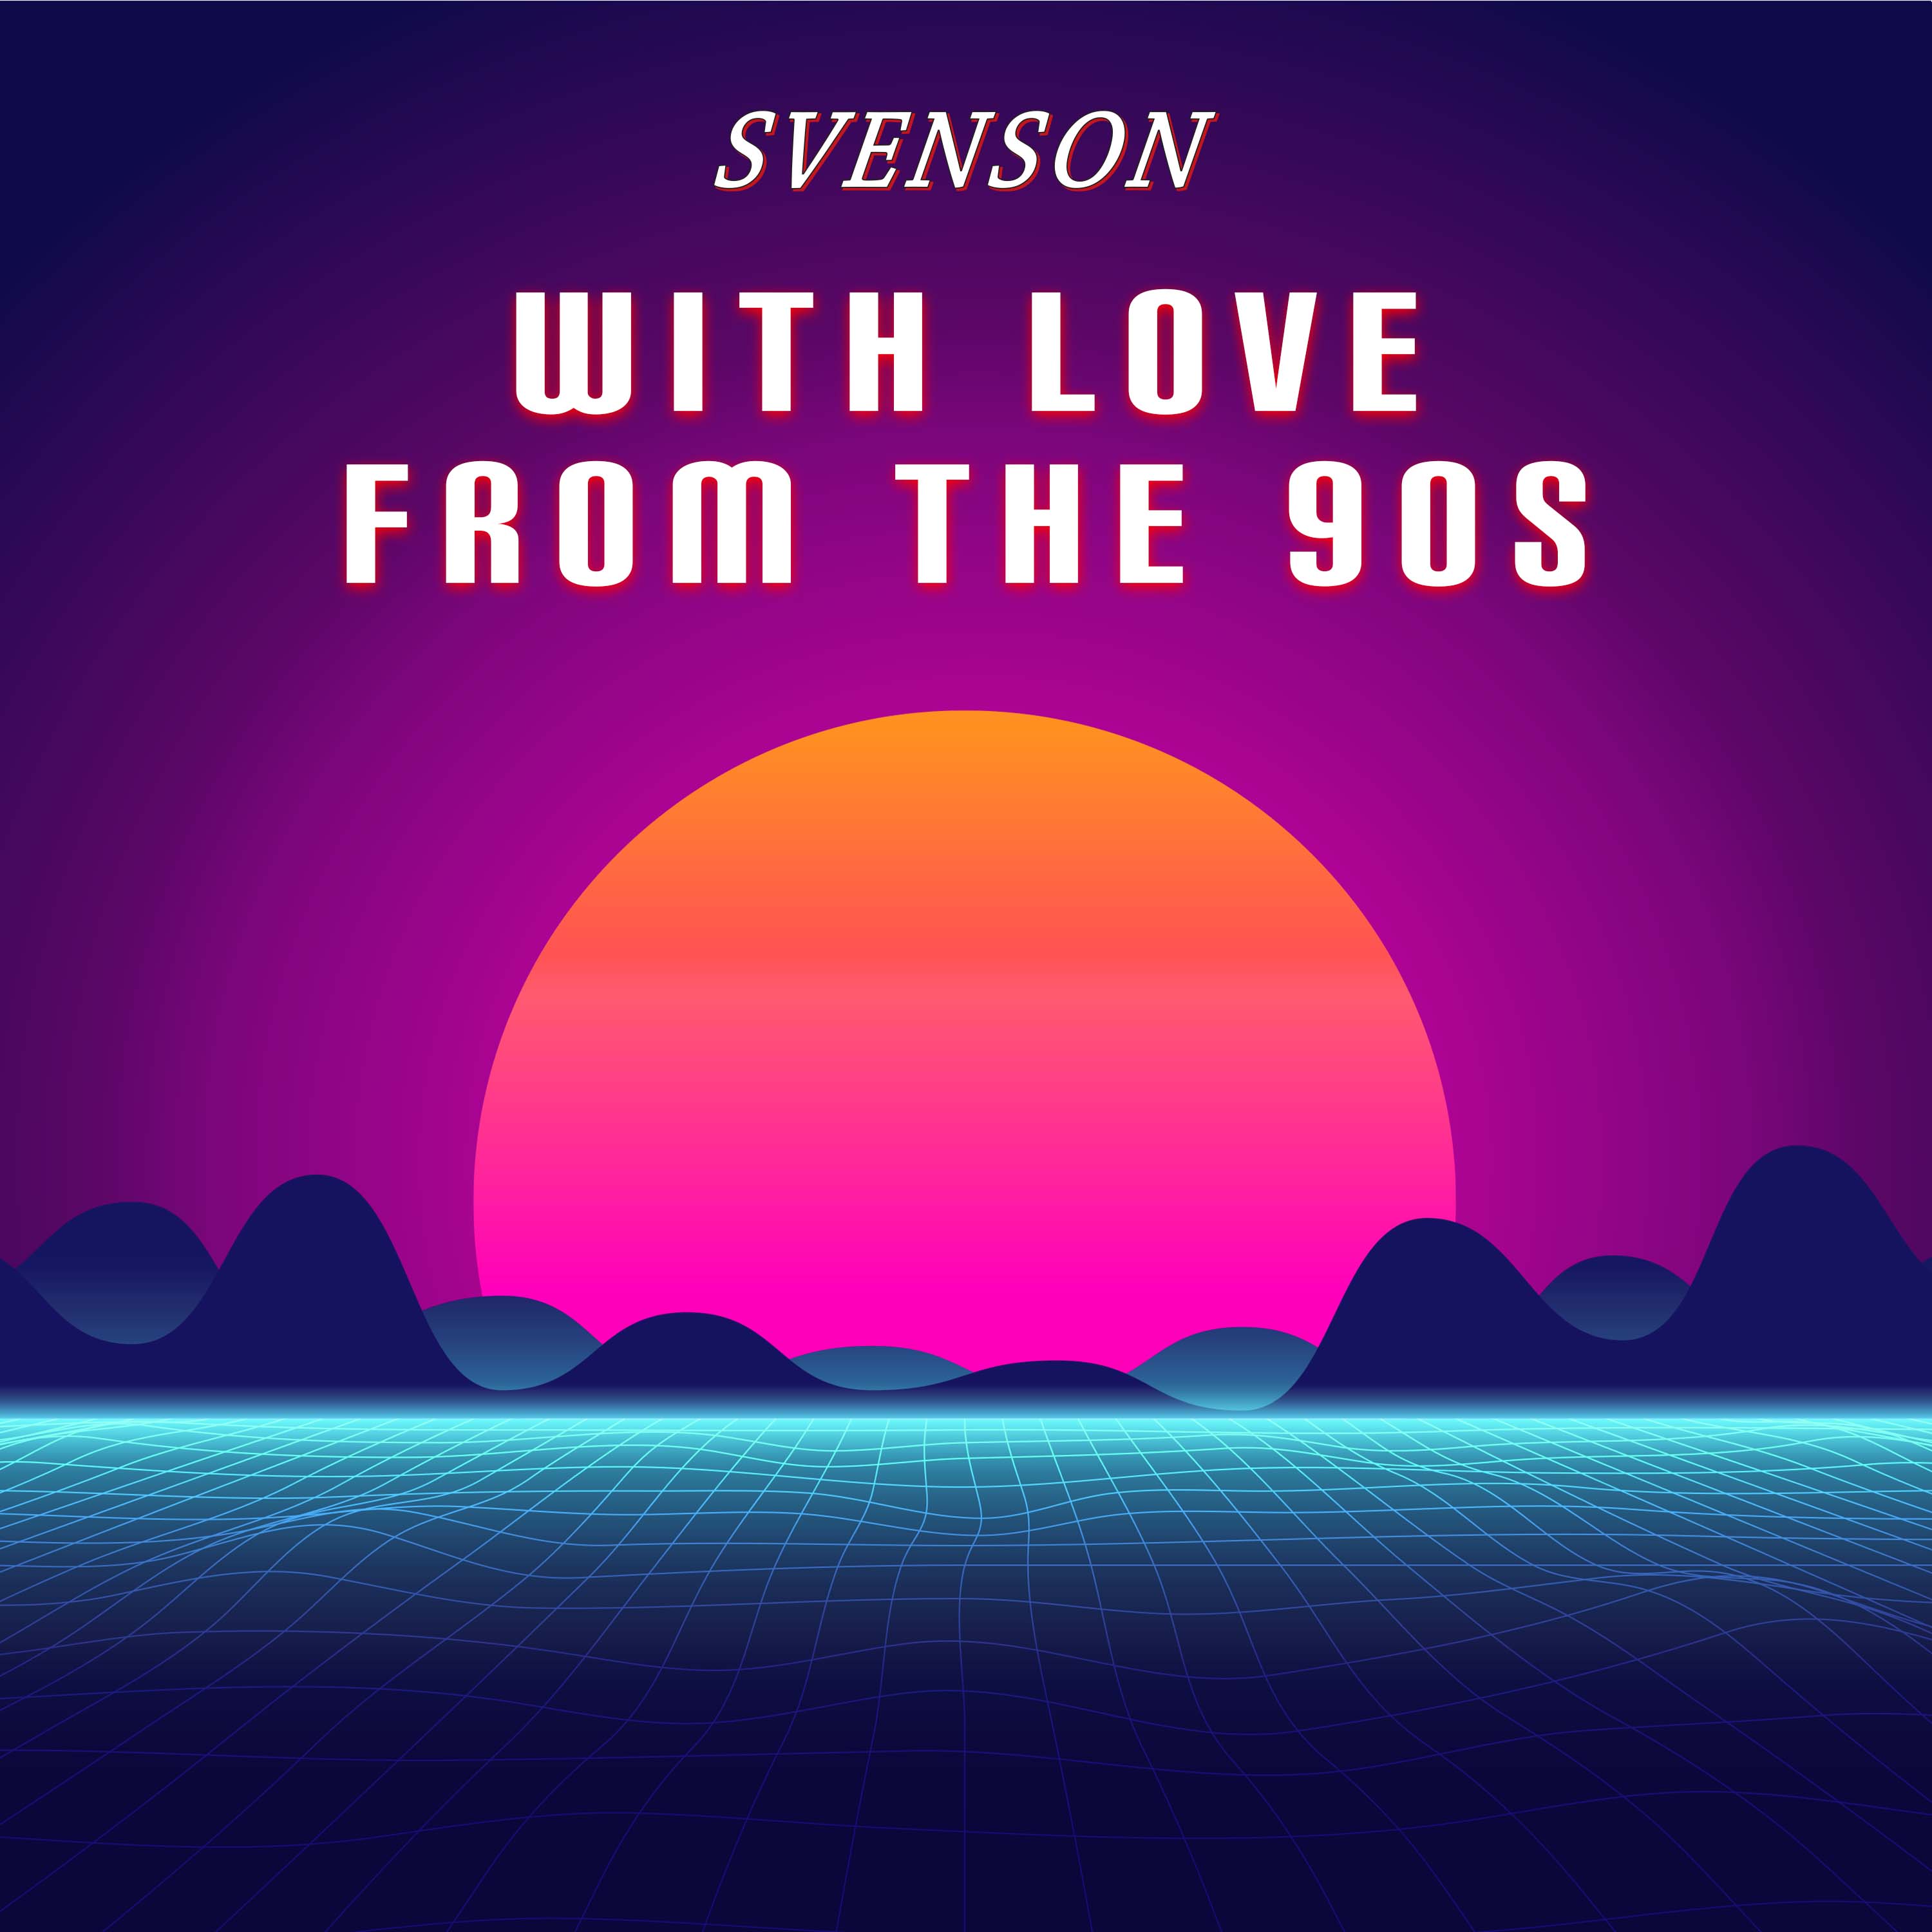 Svenson - With Love from the 90s - Cover | Freie-Pressemitteilungen.de